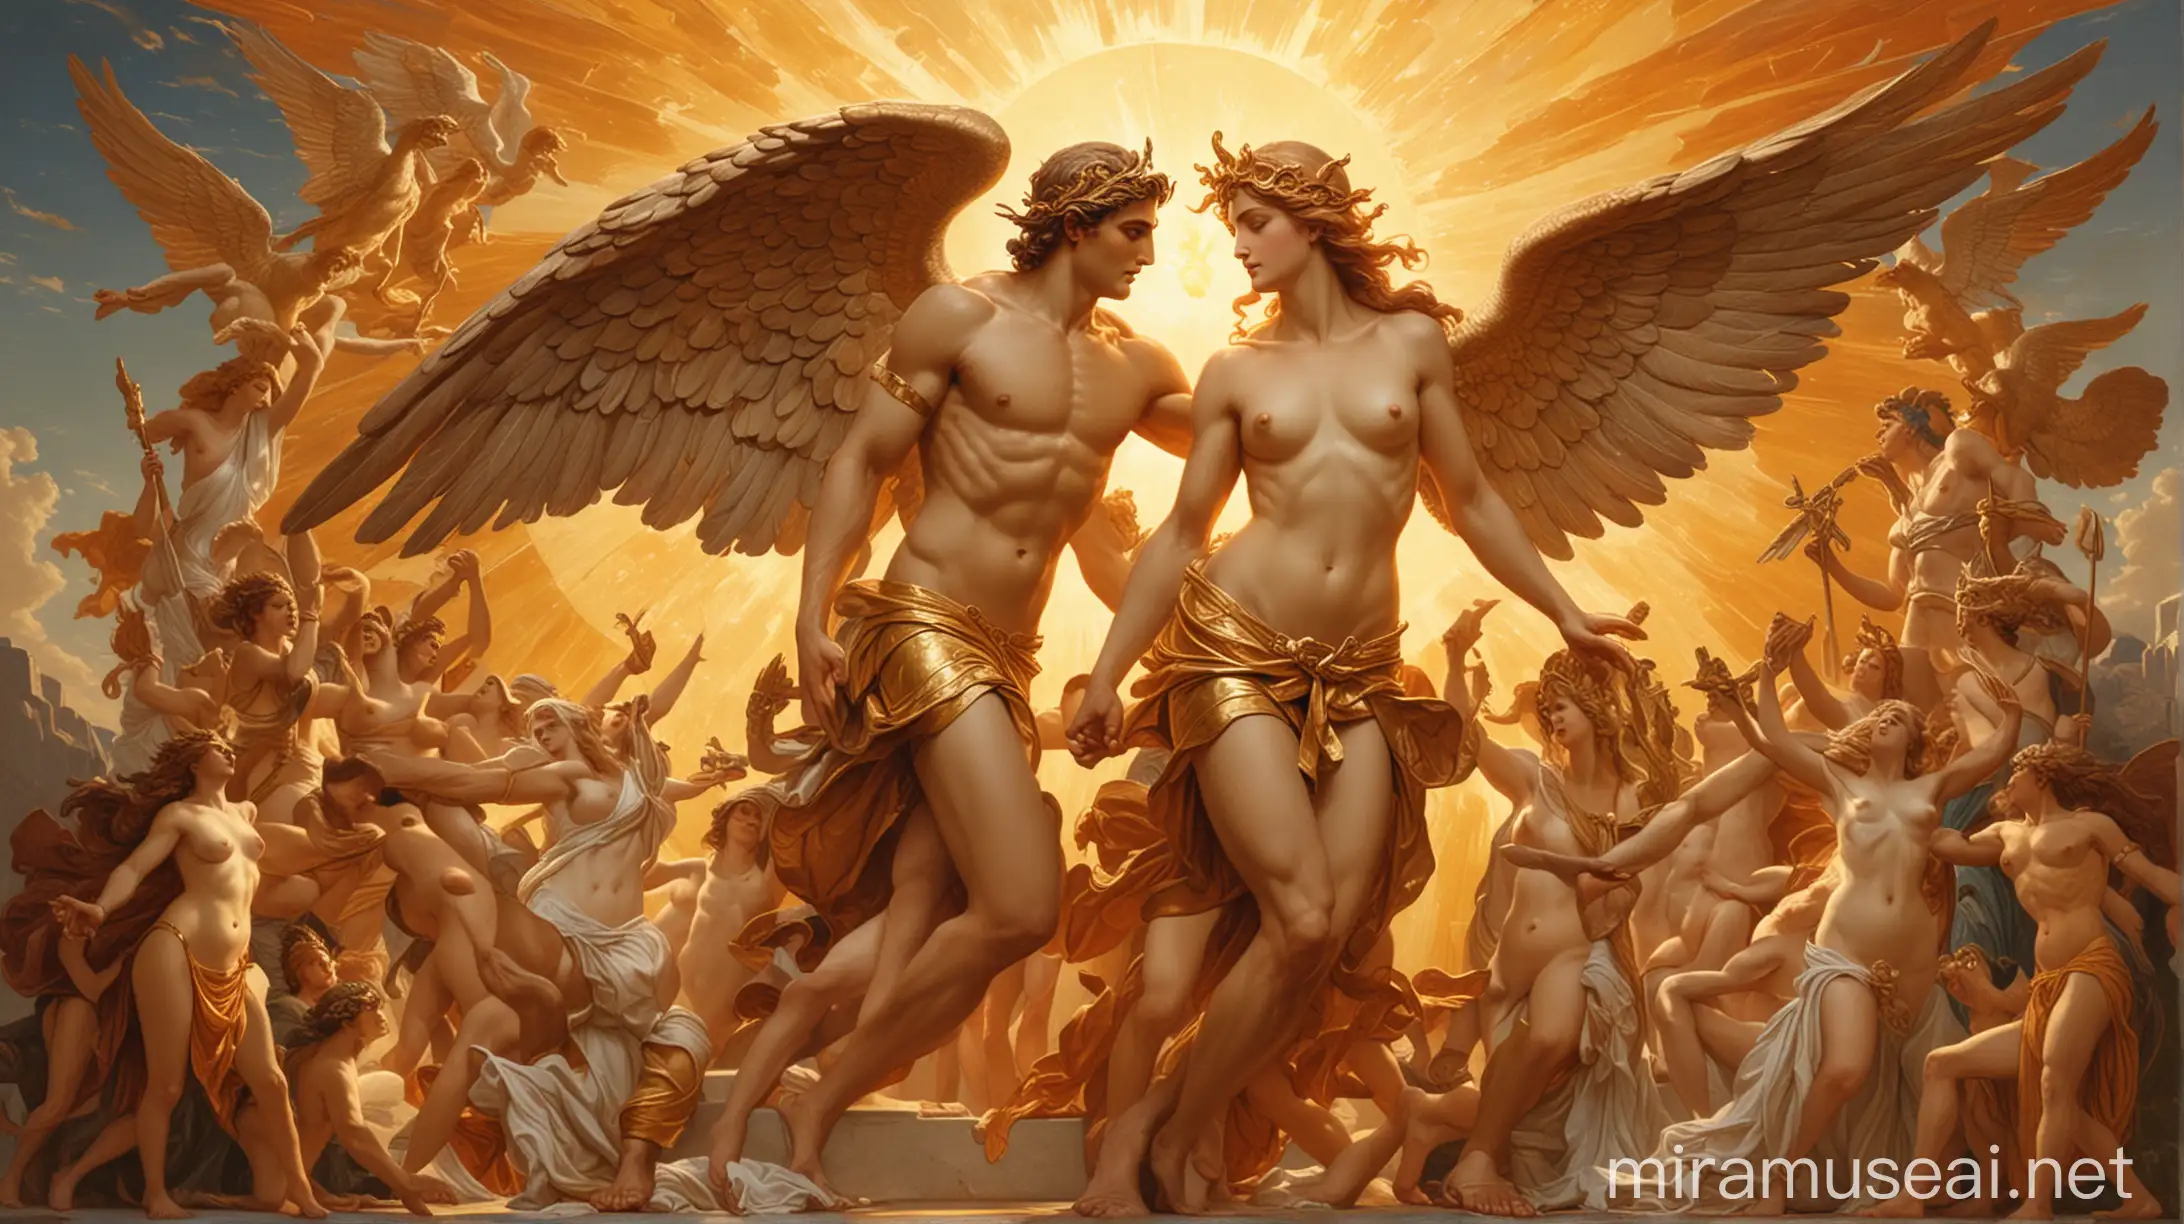 The radiant Sun in the center of the image. On the left side of the Sun, the god Hermes with a very active expression and characterized by his winged sandals and winged helmet. On the right side of the Sun, the goddess Aphrodite, sensualizing with her curves and full breasts and with a melancholic expression. The setting is enriched by antique-style details and golden tones.